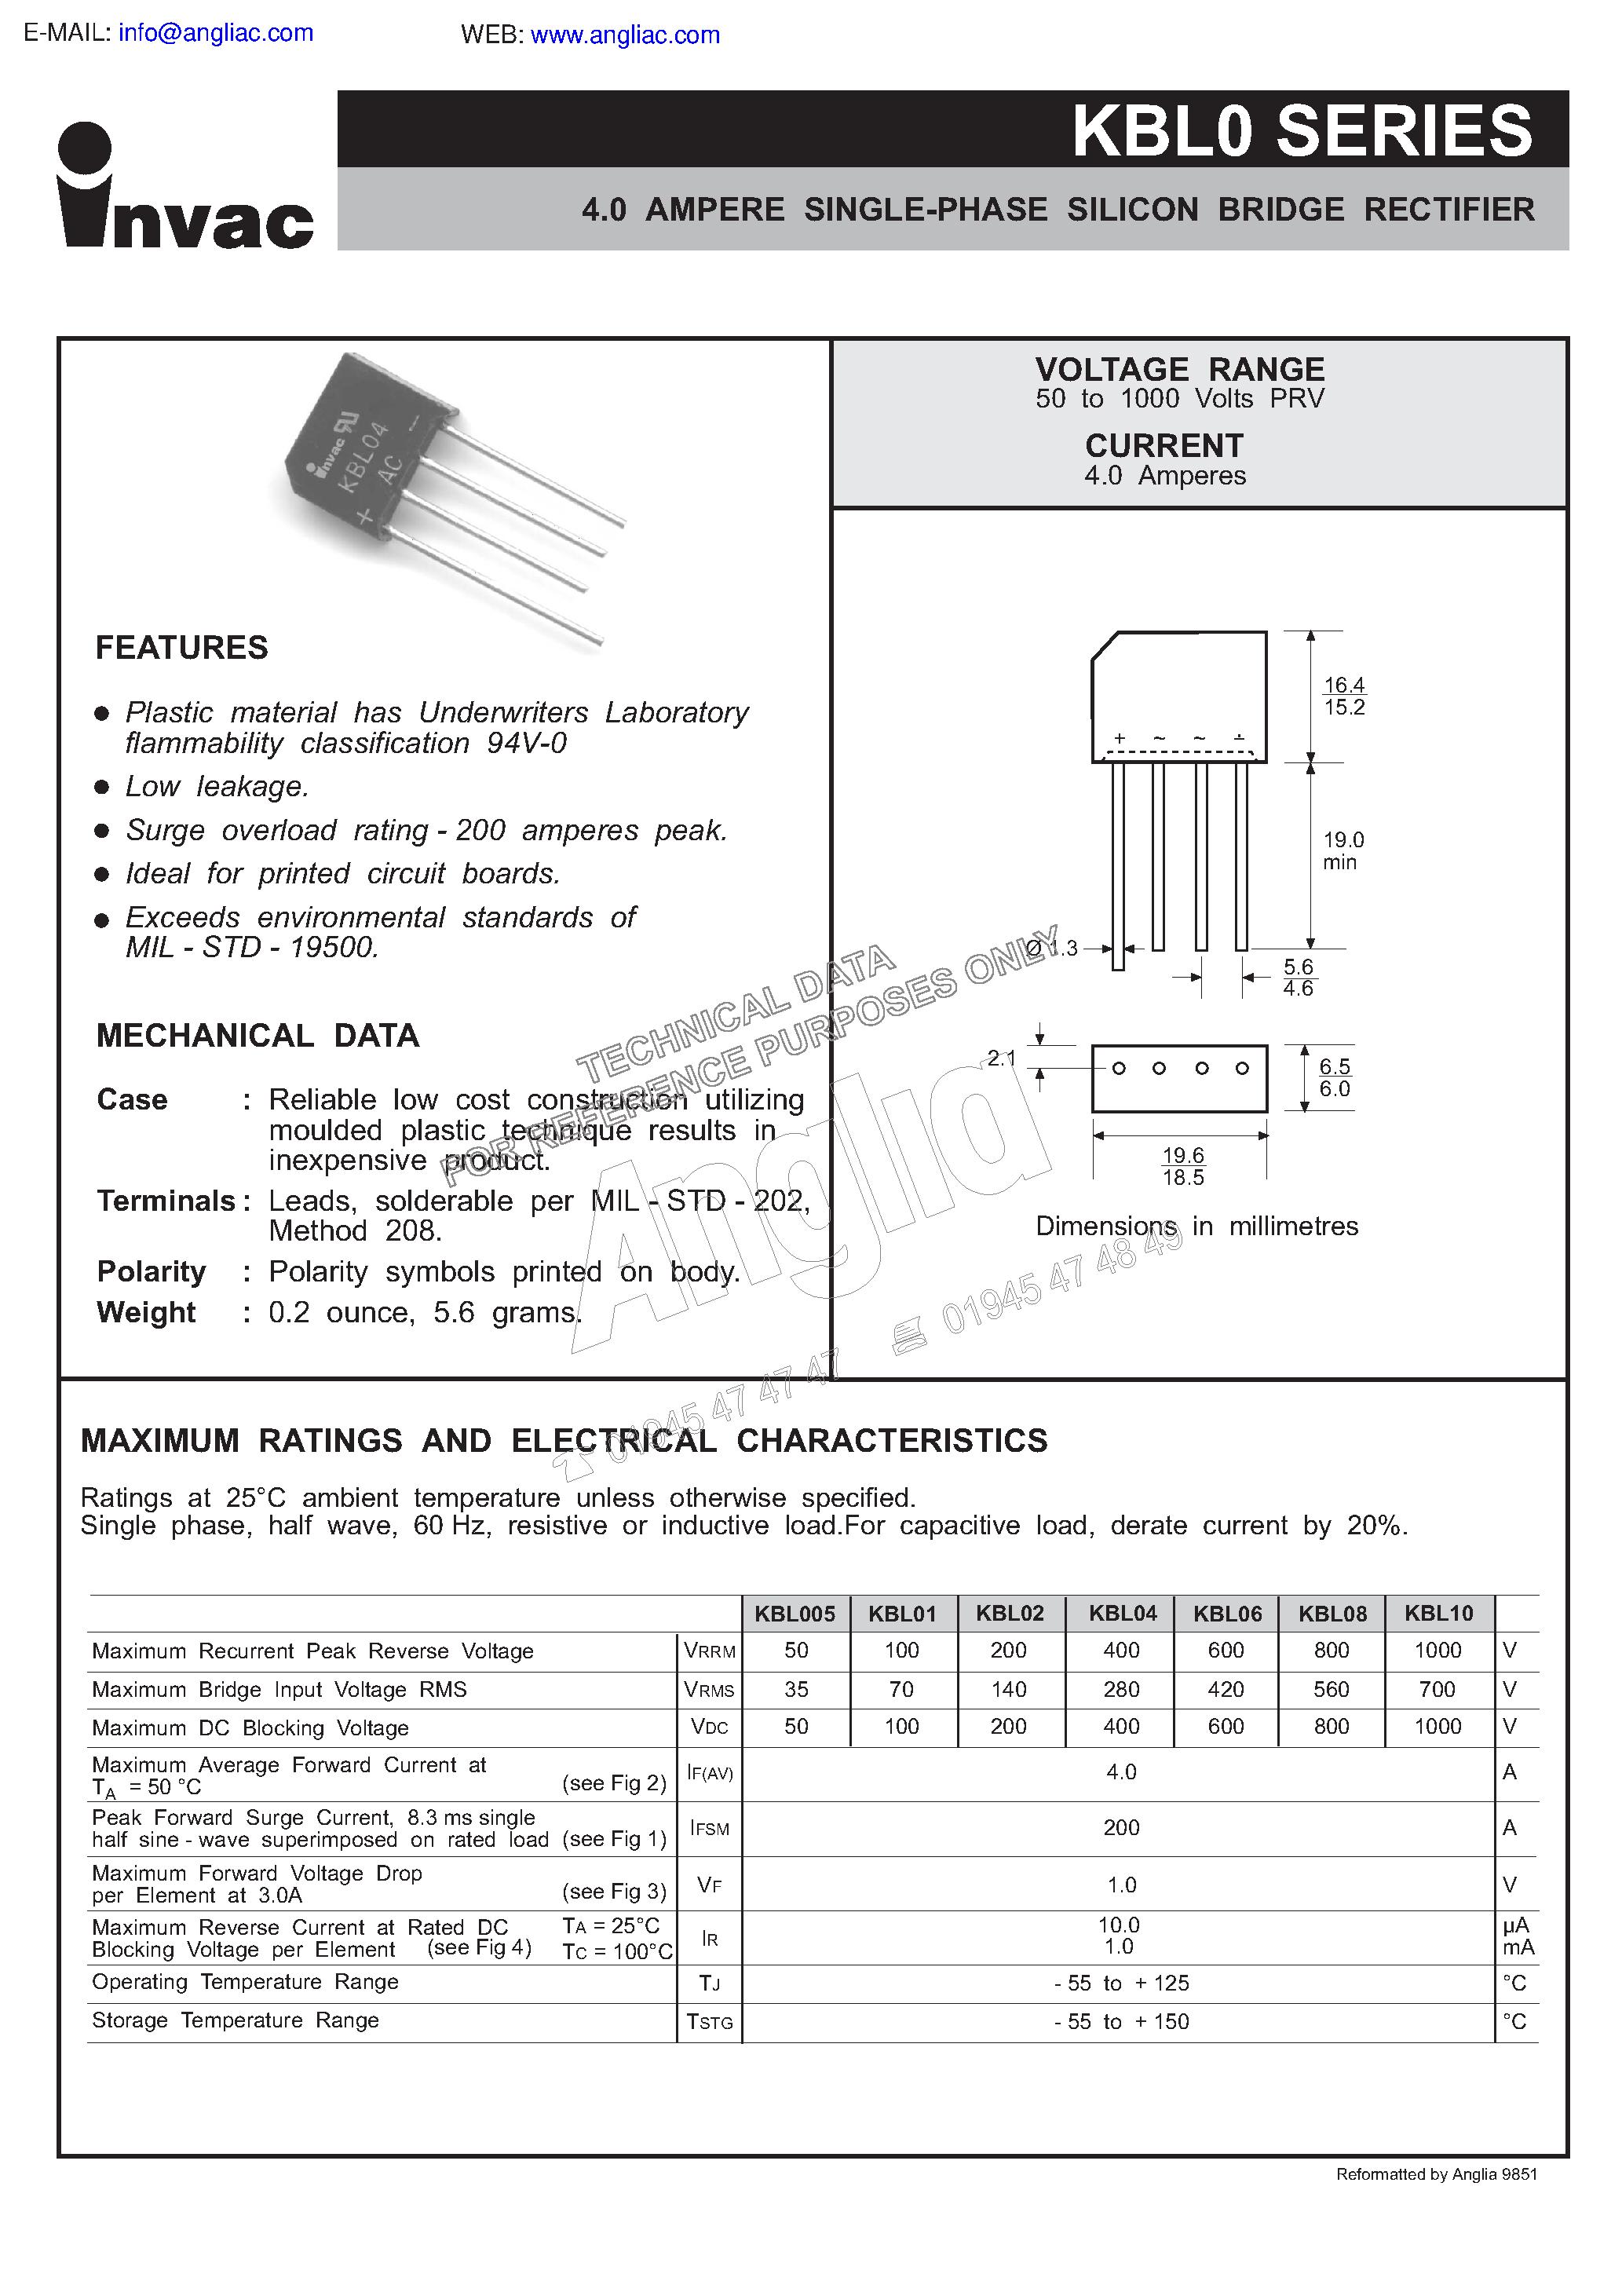 Даташит KBL0 - 4.0 AMPERE SINGLE-PHASE SILICON BRIDGE RECTIFIER страница 1